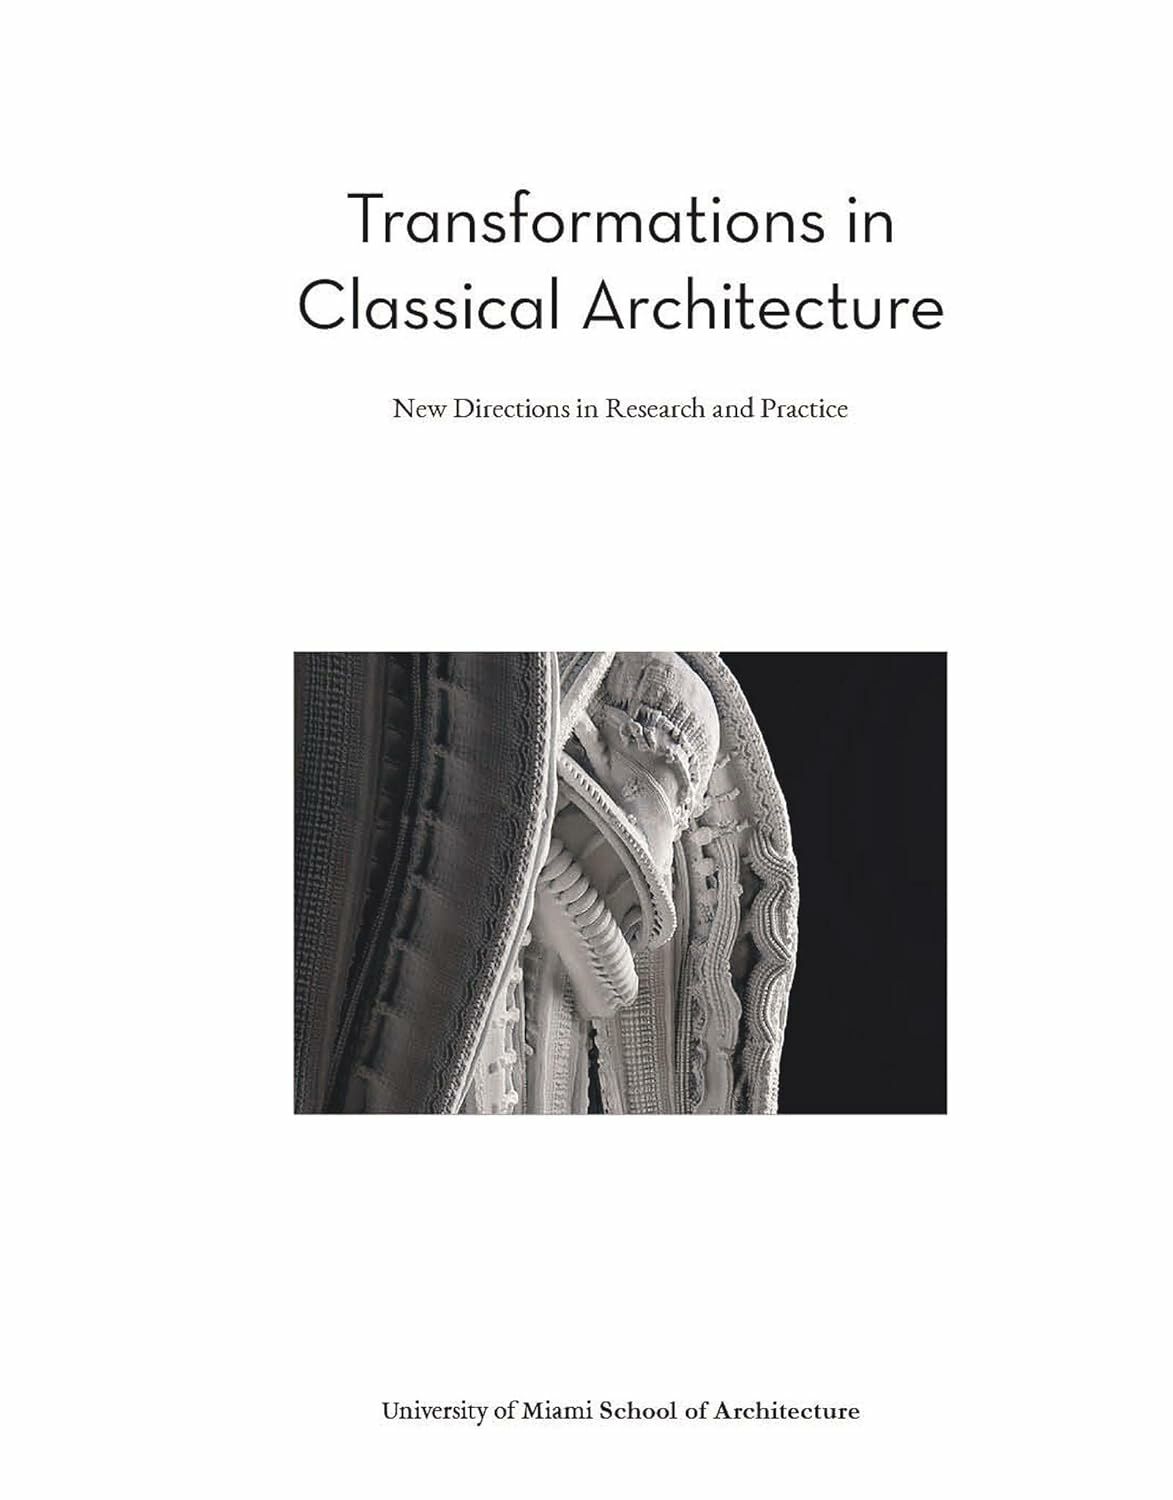 Transformations in Classical Architecture:New Directions in Research and Practice